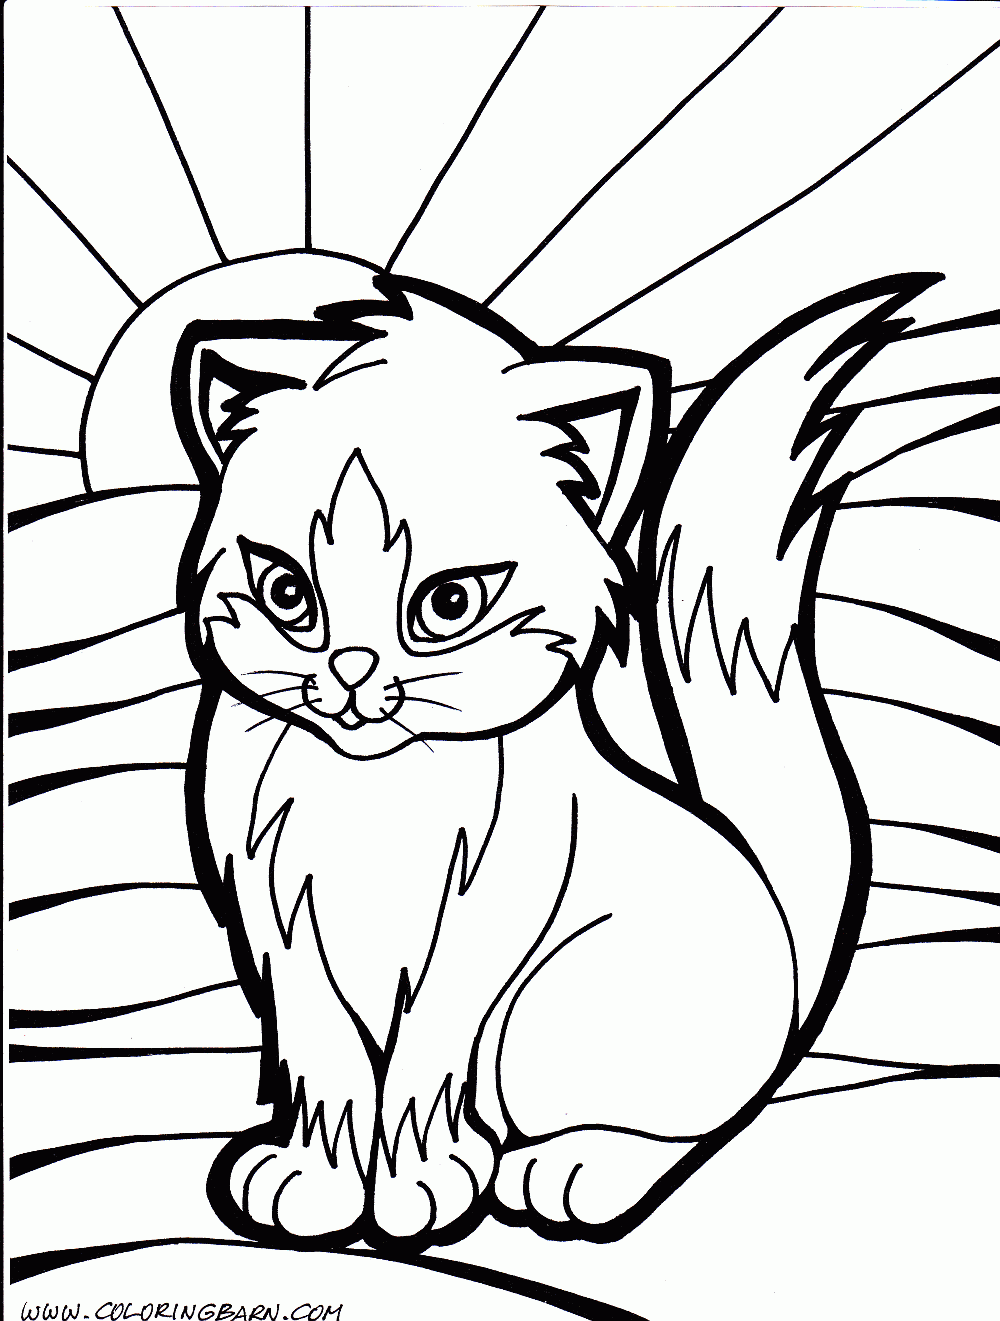 Cute kitten coloring pages to download and print for free